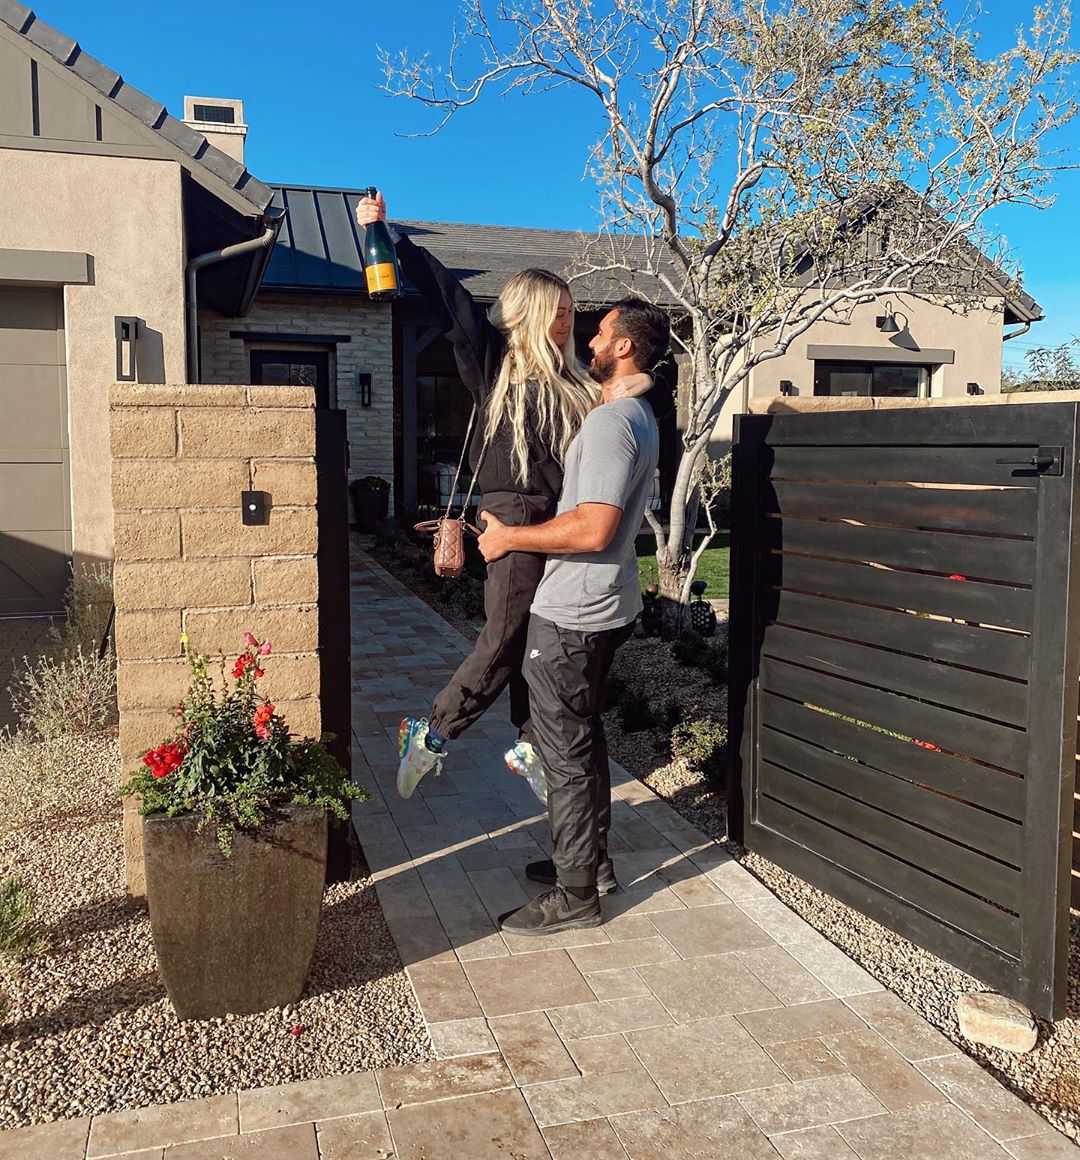 ‘Bachelor’ Alum Corinne Olympios Moves In With Boyfriend Vincent Fratantoni: See Pics of Their New Home